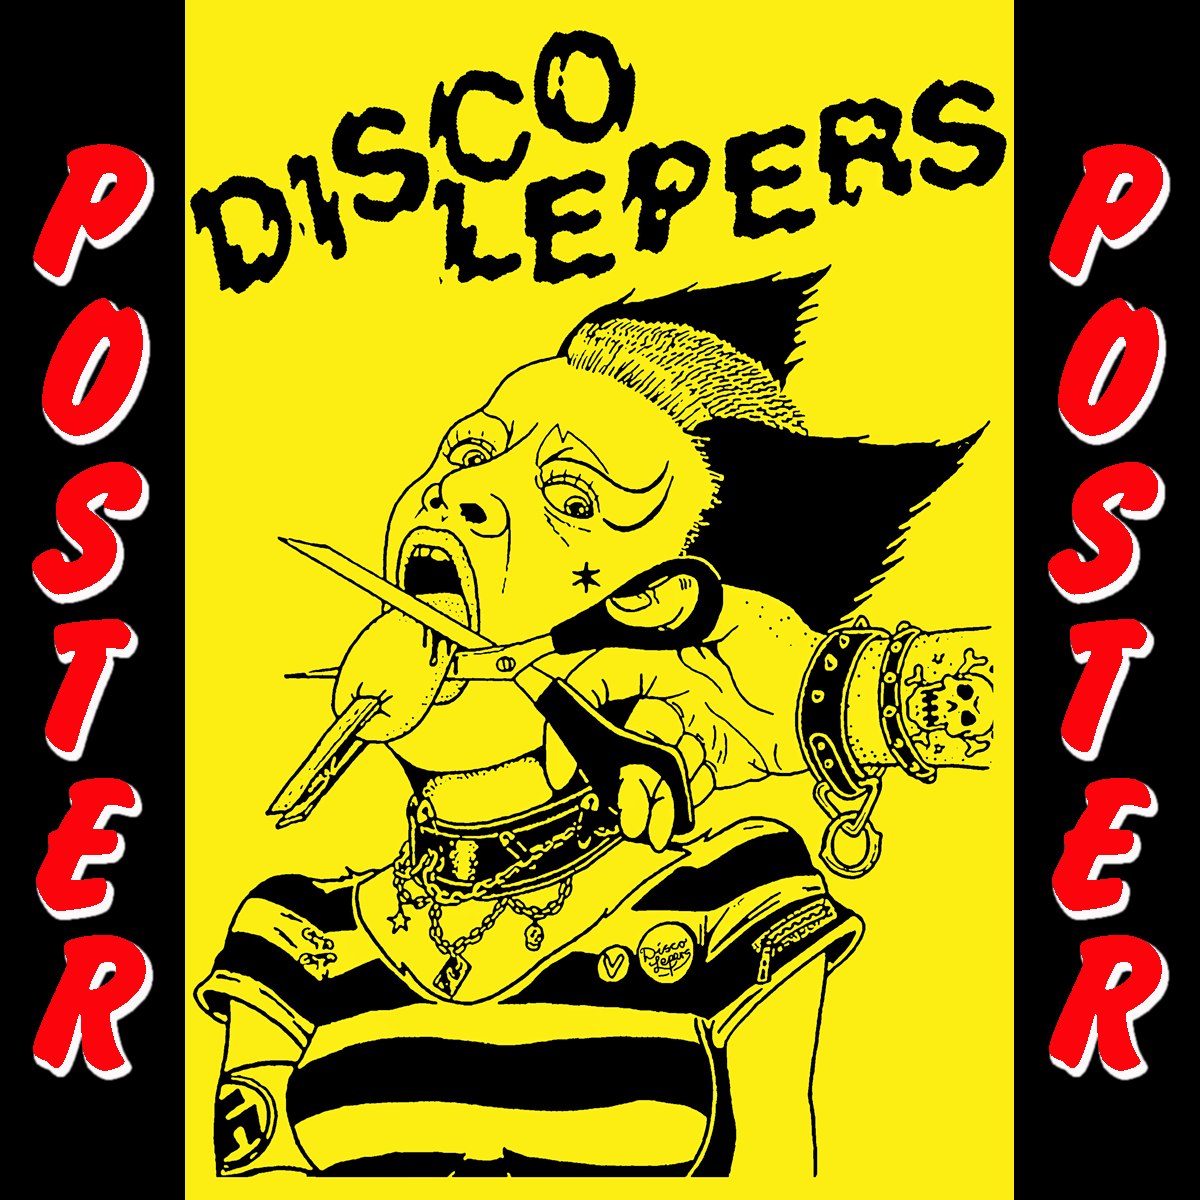 Disco Lepers- Sophisticated Shame LP ~RARE MICKEY COVER LTD TO 25 COPIES WITH POSTER!